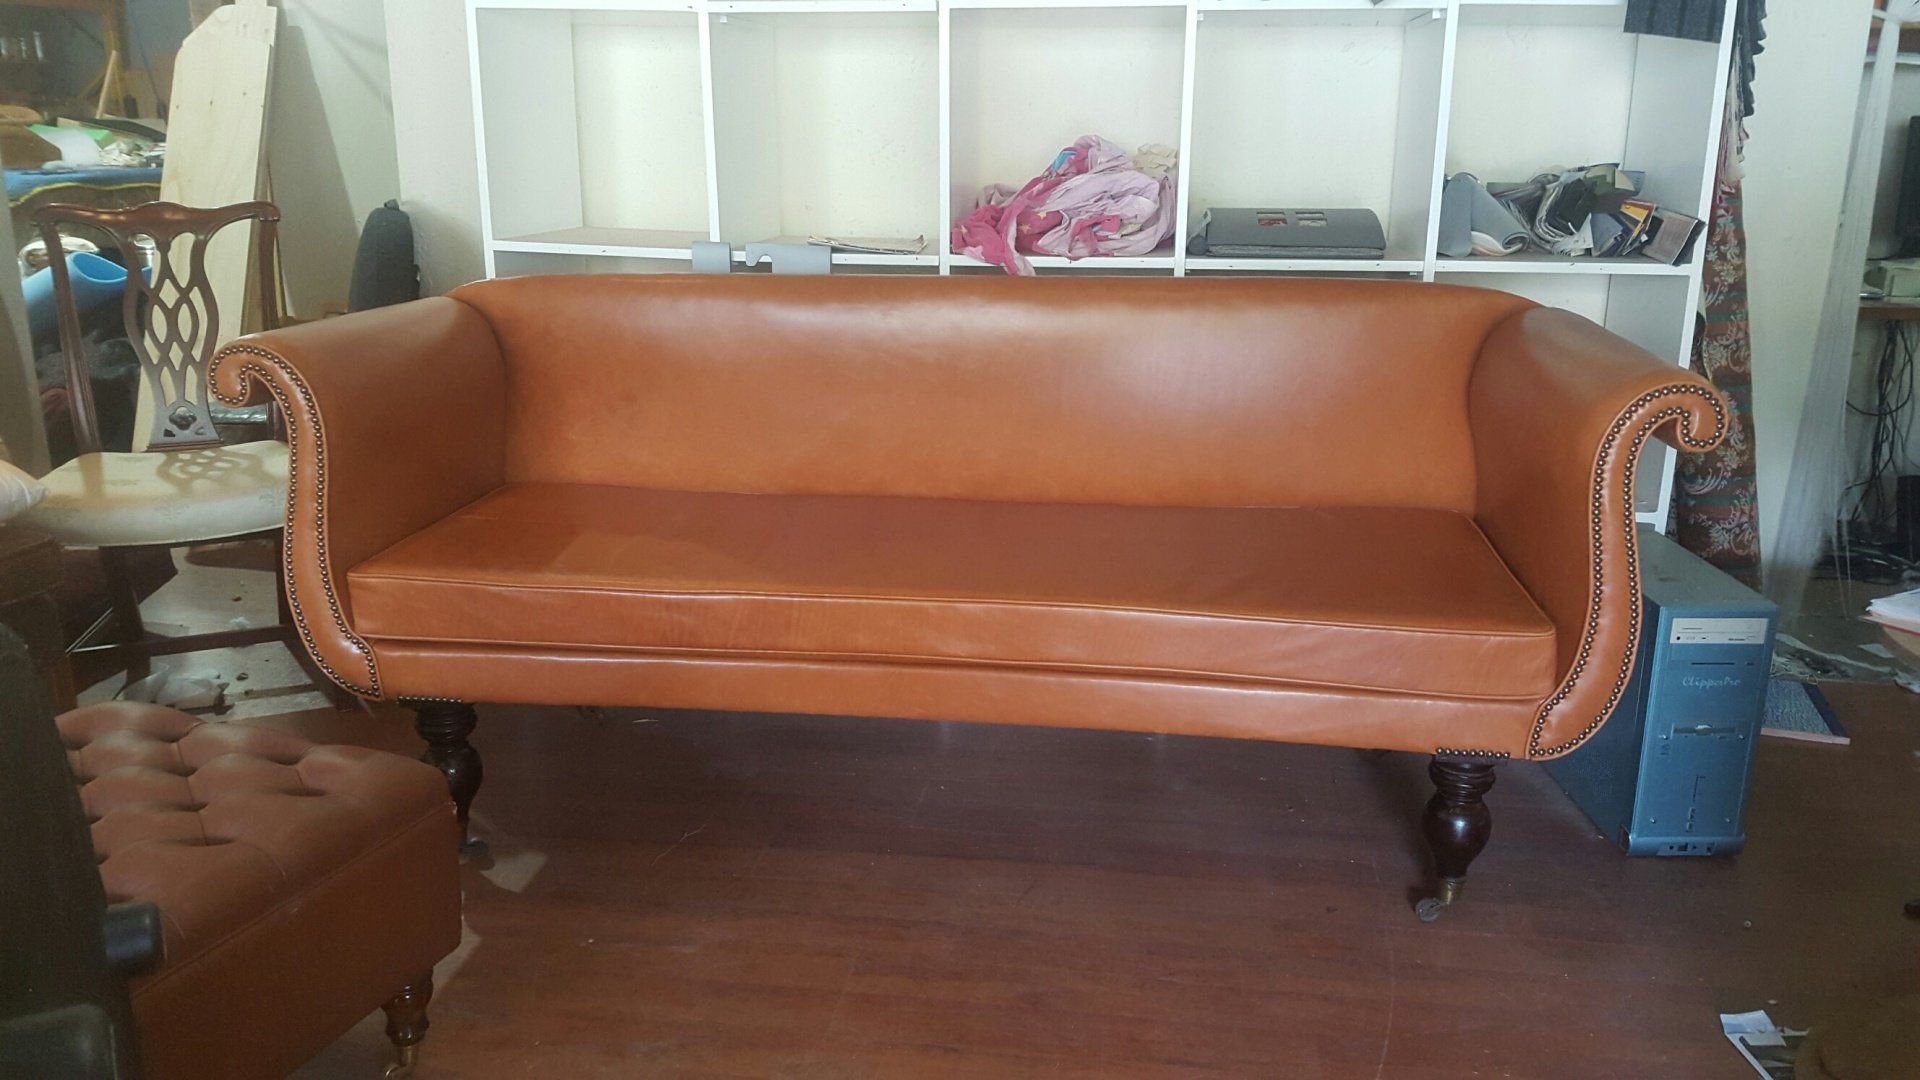 couch after refurbishment